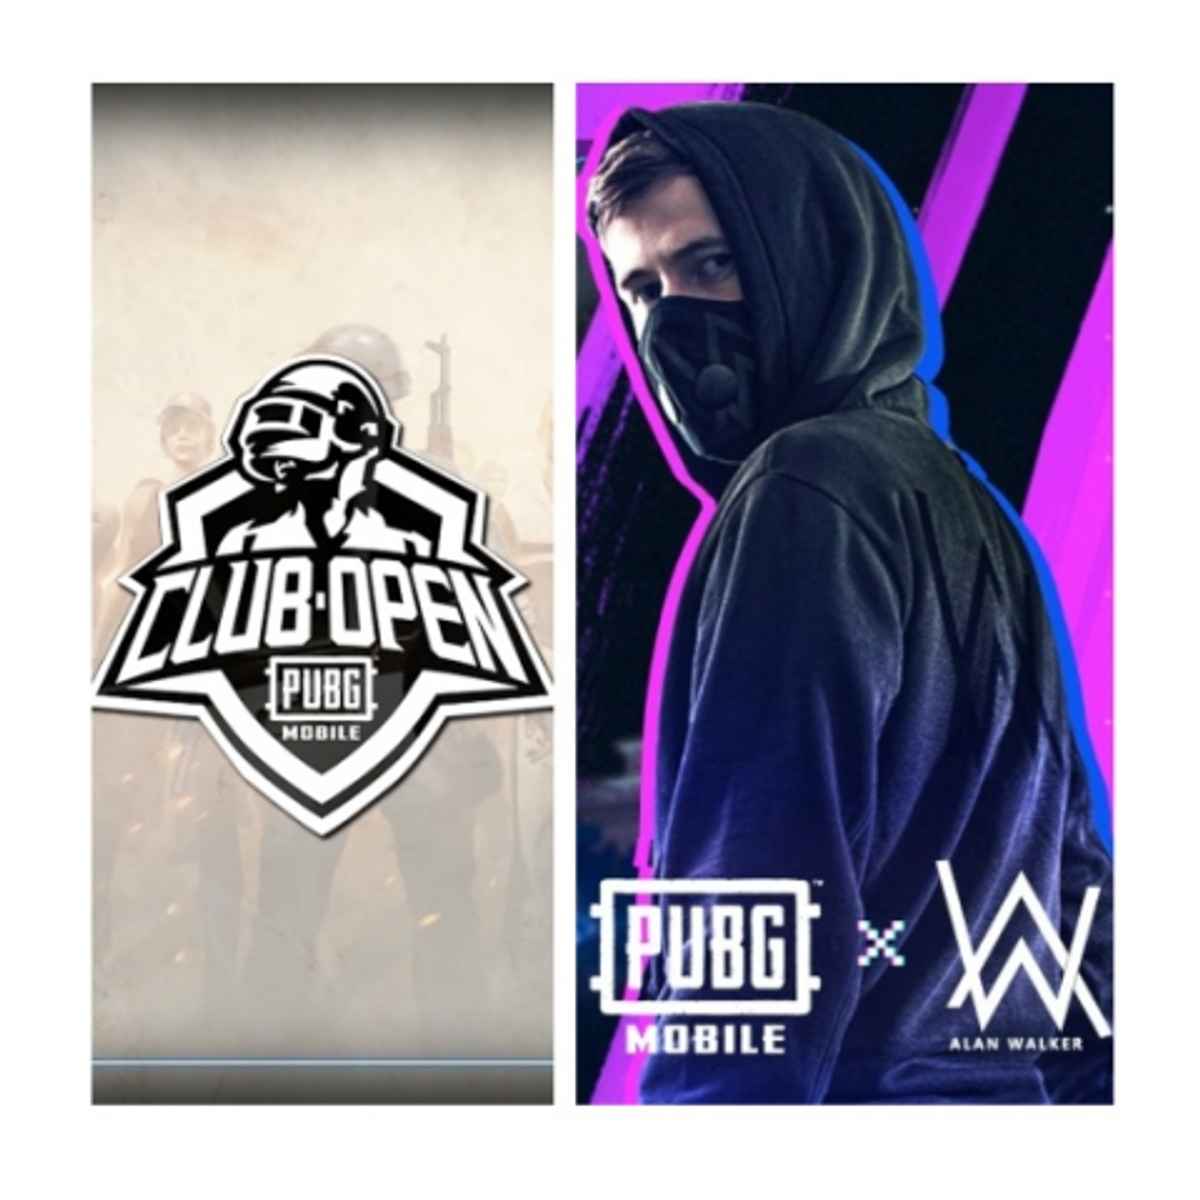 PUBG Mobile Club Open 2019 tournament and Alan Walker On My ... - 